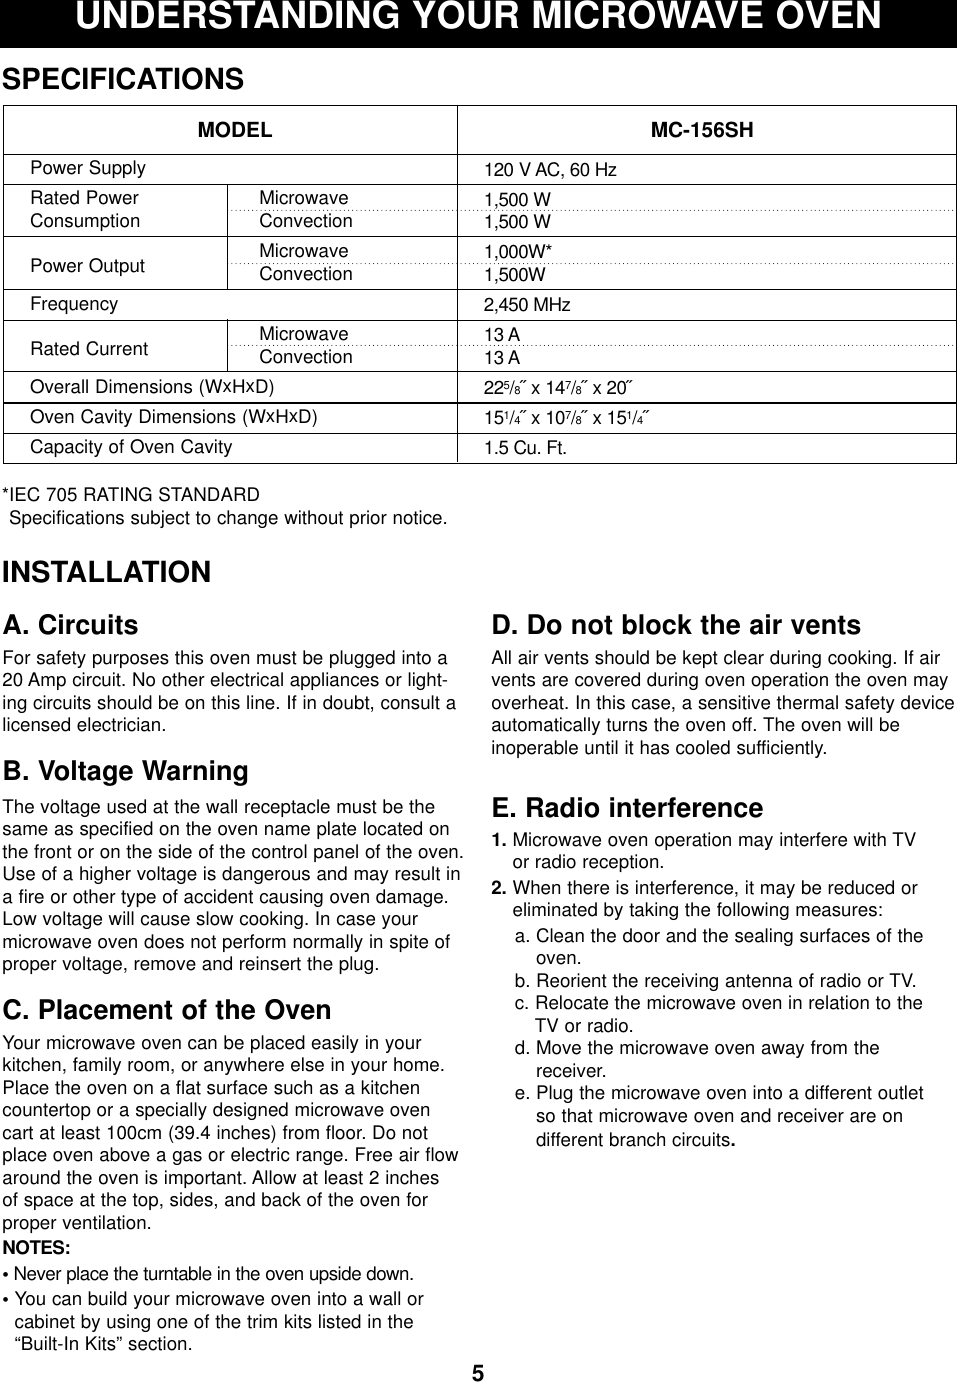 5UNDERSTANDING YOUR MICROWAVE OVENSPECIFICATIONS*IEC 705 RATING STANDARD Specifications subject to change without prior notice.MODEL MC-156SHPower SupplyRated Power  MicrowaveConsumption ConvectionPower Output MicrowaveConvectionFrequencyRated Current MicrowaveConvectionOverall Dimensions (WxHxD)Oven Cavity Dimensions (WxHxD)Capacity of Oven Cavity120 V AC, 60 Hz1,500 W1,500 W1,000W*1,500W2,450 MHz13 A13 A225/8˝ x 147/8˝ x 20˝151/4˝ x 107/8˝ x 151/4˝1.5 Cu. Ft.INSTALLATIONA. CircuitsFor safety purposes this oven must be plugged into a20 Amp circuit. No other electrical appliances or light-ing circuits should be on this line. If in doubt, consult alicensed electrician.B. Voltage Warning The voltage used at the wall receptacle must be thesame as specified on the oven name plate located onthe front or on the side of the control panel of the oven.Use of a higher voltage is dangerous and may result ina fire or other type of accident causing oven damage.Low voltage will cause slow cooking. In case yourmicrowave oven does not perform normally in spite ofproper voltage, remove and reinsert the plug.C. Placement of the OvenYour microwave oven can be placed easily in yourkitchen, family room, or anywhere else in your home.Place the oven on a flat surface such as a kitchencountertop or a specially designed microwave ovencart at least 100cm (39.4 inches) from floor. Do notplace oven above a gas or electric range. Free air flowaround the oven is important. Allow at least 2 inches of space at the top, sides, and back of the oven forproper ventilation. NOTES:•Never place the turntable in the oven upside down.• You can build your microwave oven into a wall or cabinet by using one of the trim kits listed in the“Built-In Kits” section.D. Do not block the air ventsAll air vents should be kept clear during cooking. If airvents are covered during oven operation the oven mayoverheat. In this case, a sensitive thermal safety deviceautomatically turns the oven off. The oven will be inoperable until it has cooled sufficiently.E. Radio interference1. Microwave oven operation may interfere with TV or radio reception.2. When there is interference, it may be reduced oreliminated by taking the following measures:a. Clean the door and the sealing surfaces of theoven.b. Reorient the receiving antenna of radio or TV.c. Relocate the microwave oven in relation to the TV or radio.d. Move the microwave oven away from the receiver.e. Plug the microwave oven into a different outlet so that microwave oven and receiver are on different branch circuits.